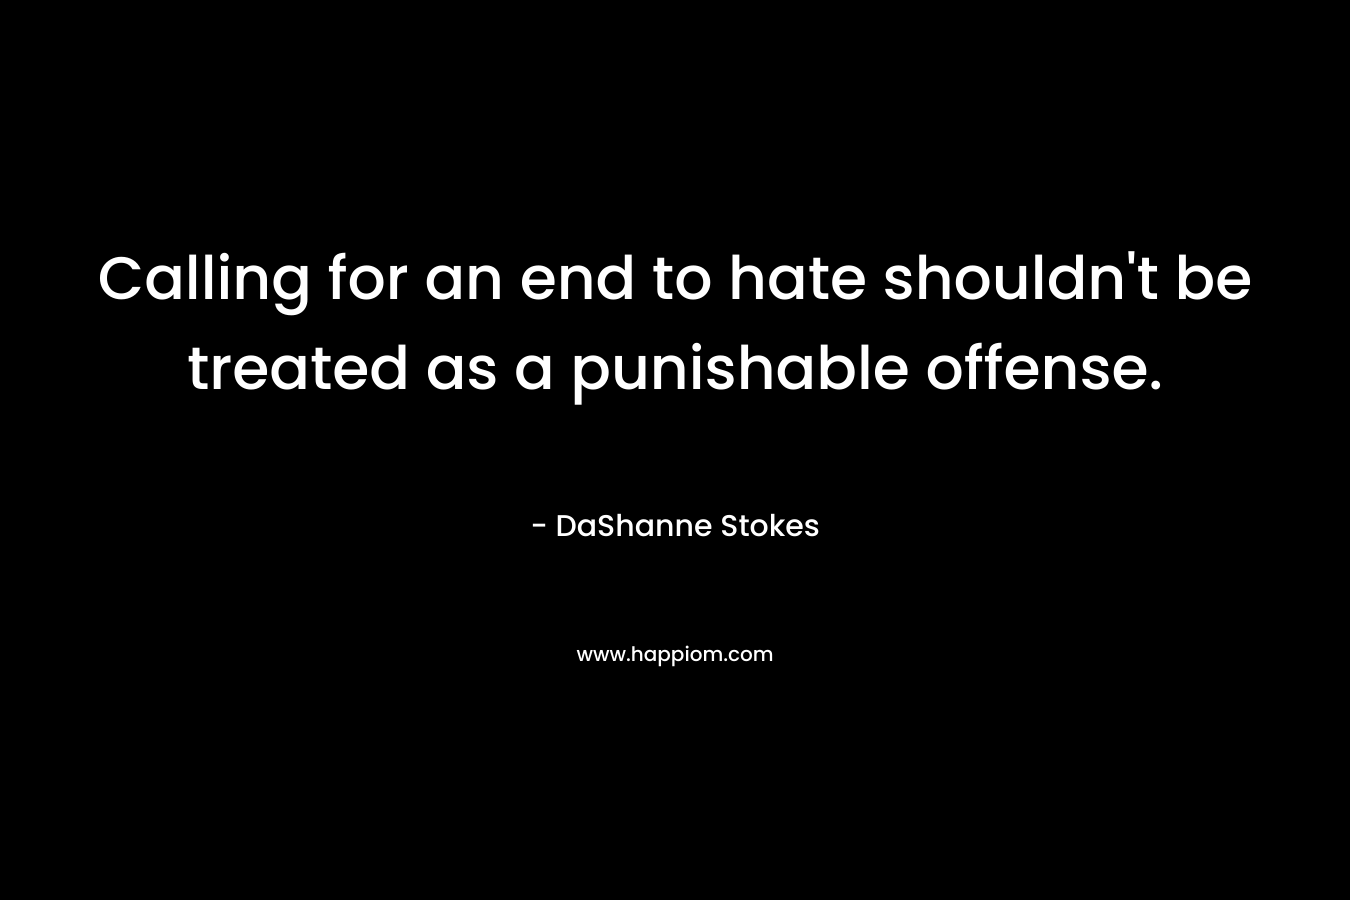 Calling for an end to hate shouldn't be treated as a punishable offense.